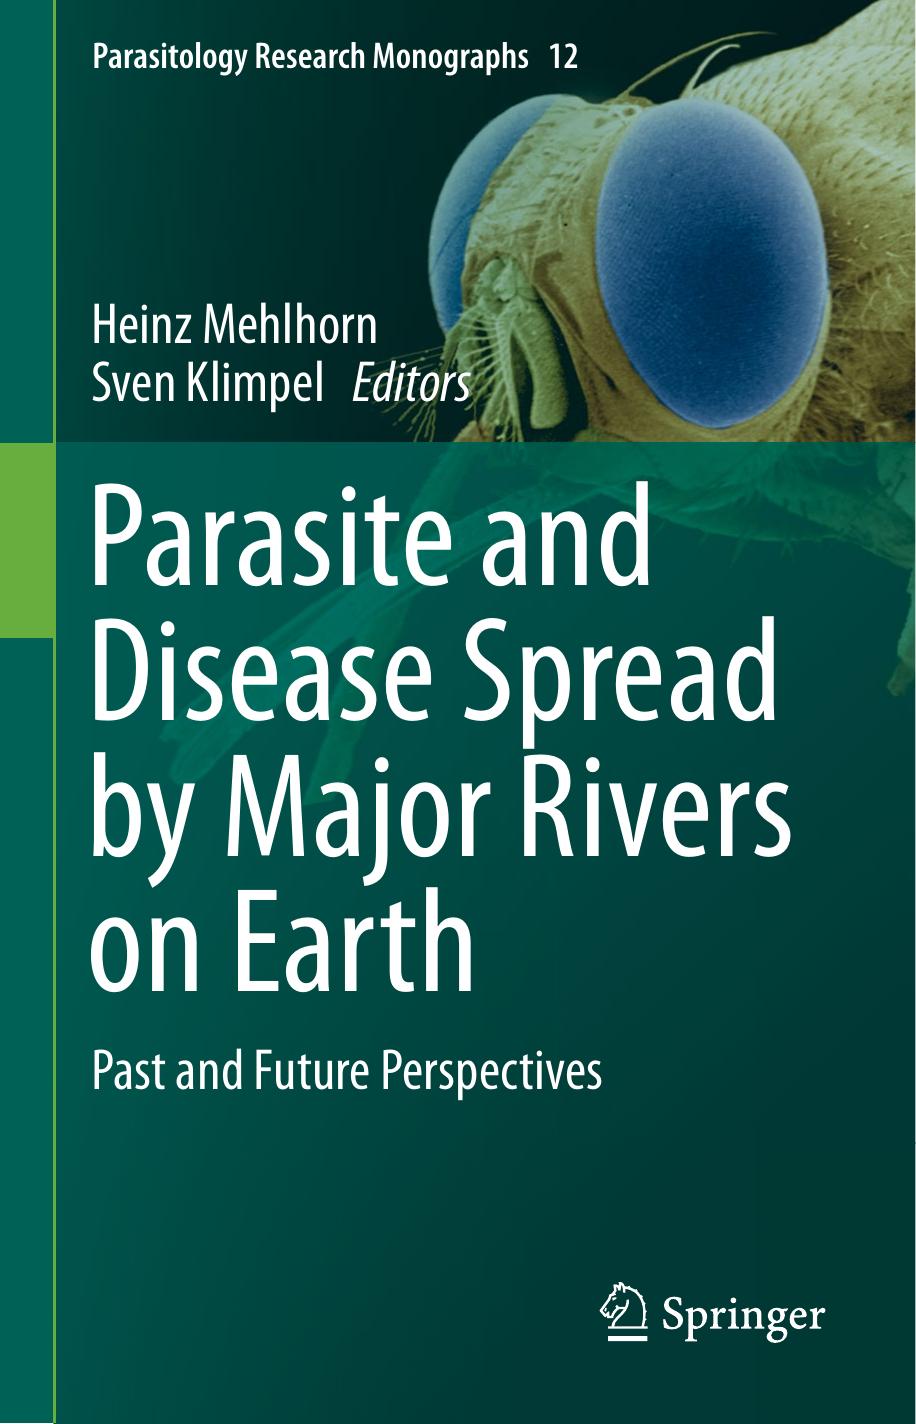 Parasite and Disease Spread by Major Rivers on Earth  Past and Future Perspectives (2019)